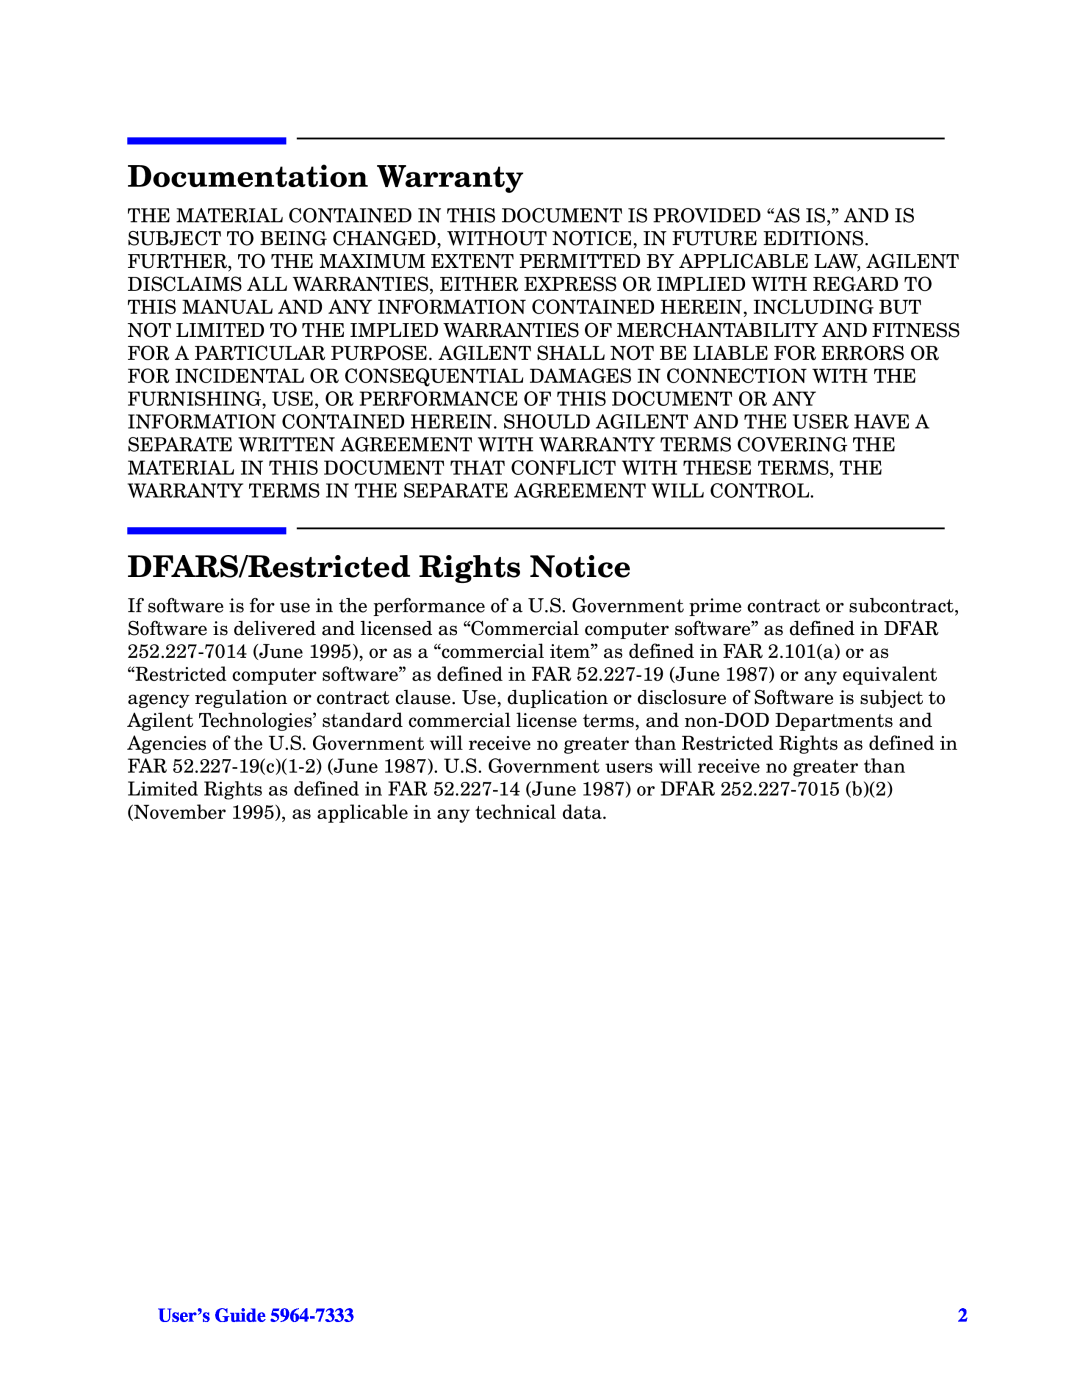 Agilent Technologies N6315A, N6314A manual Documentation Warranty, DFARS/Restricted Rights Notice, User’s Guide 